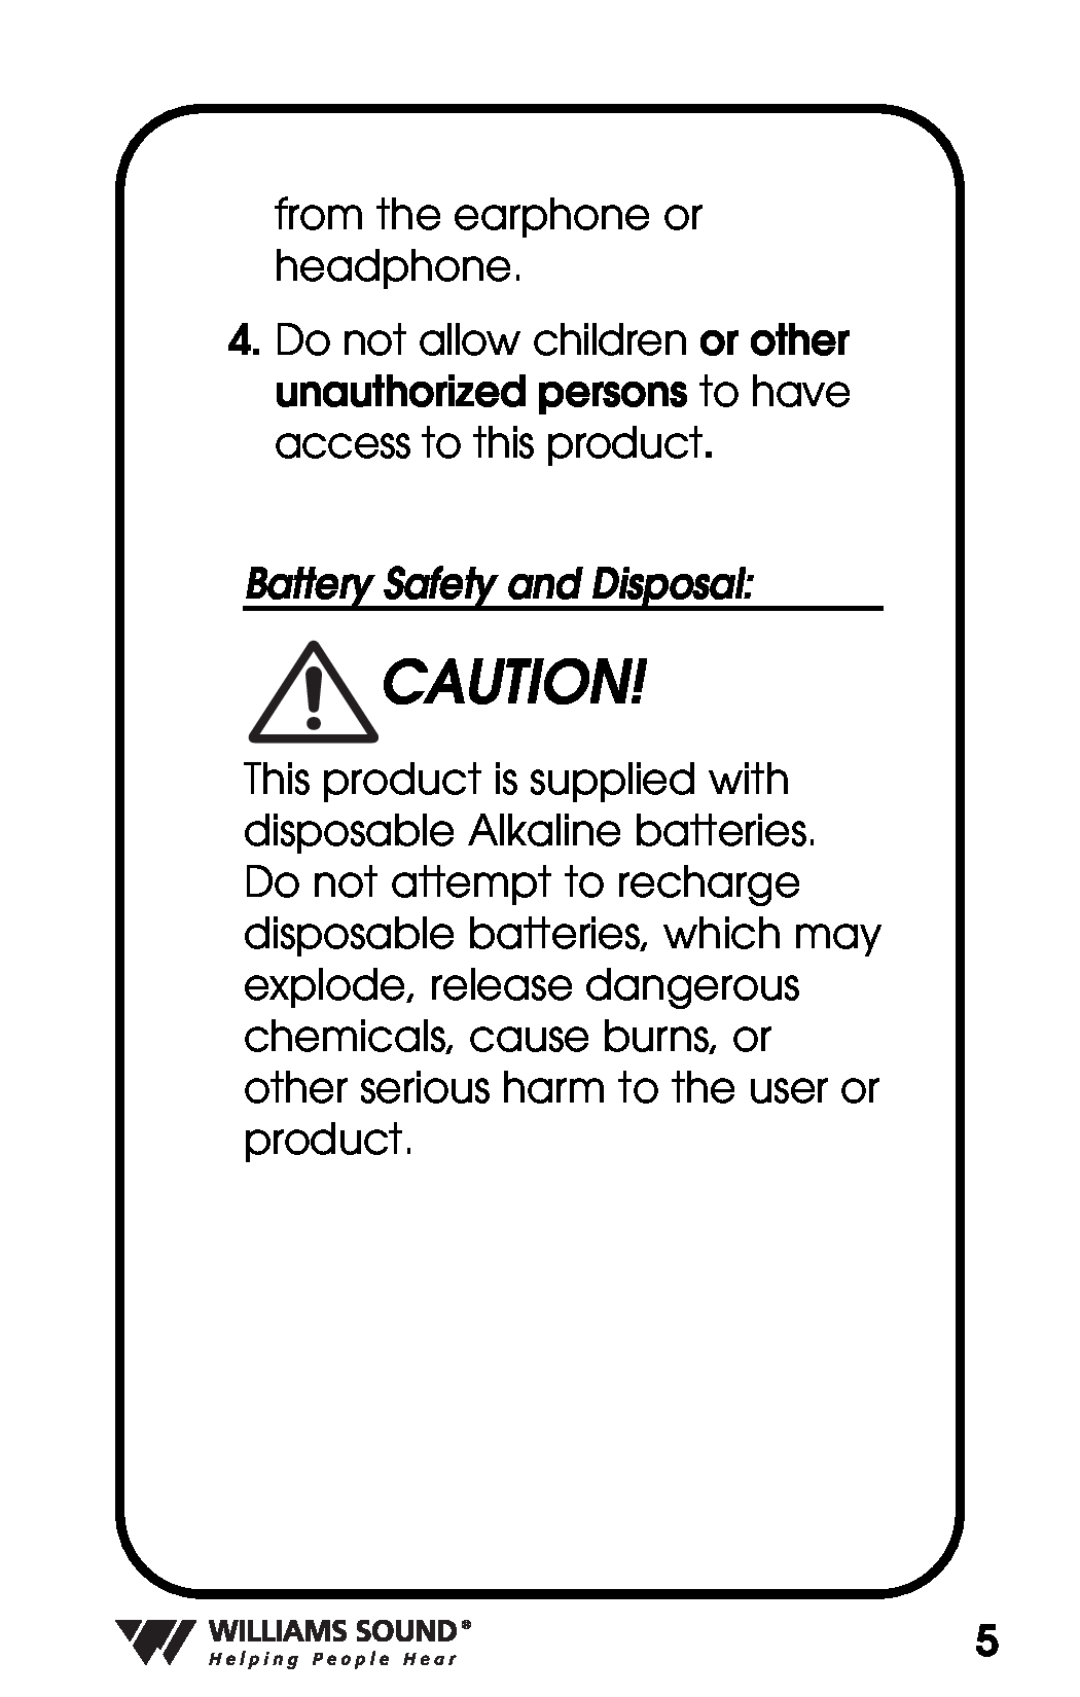 Williams Sound PKT D1 manual from the earphone or headphone, Battery Safety and Disposal 